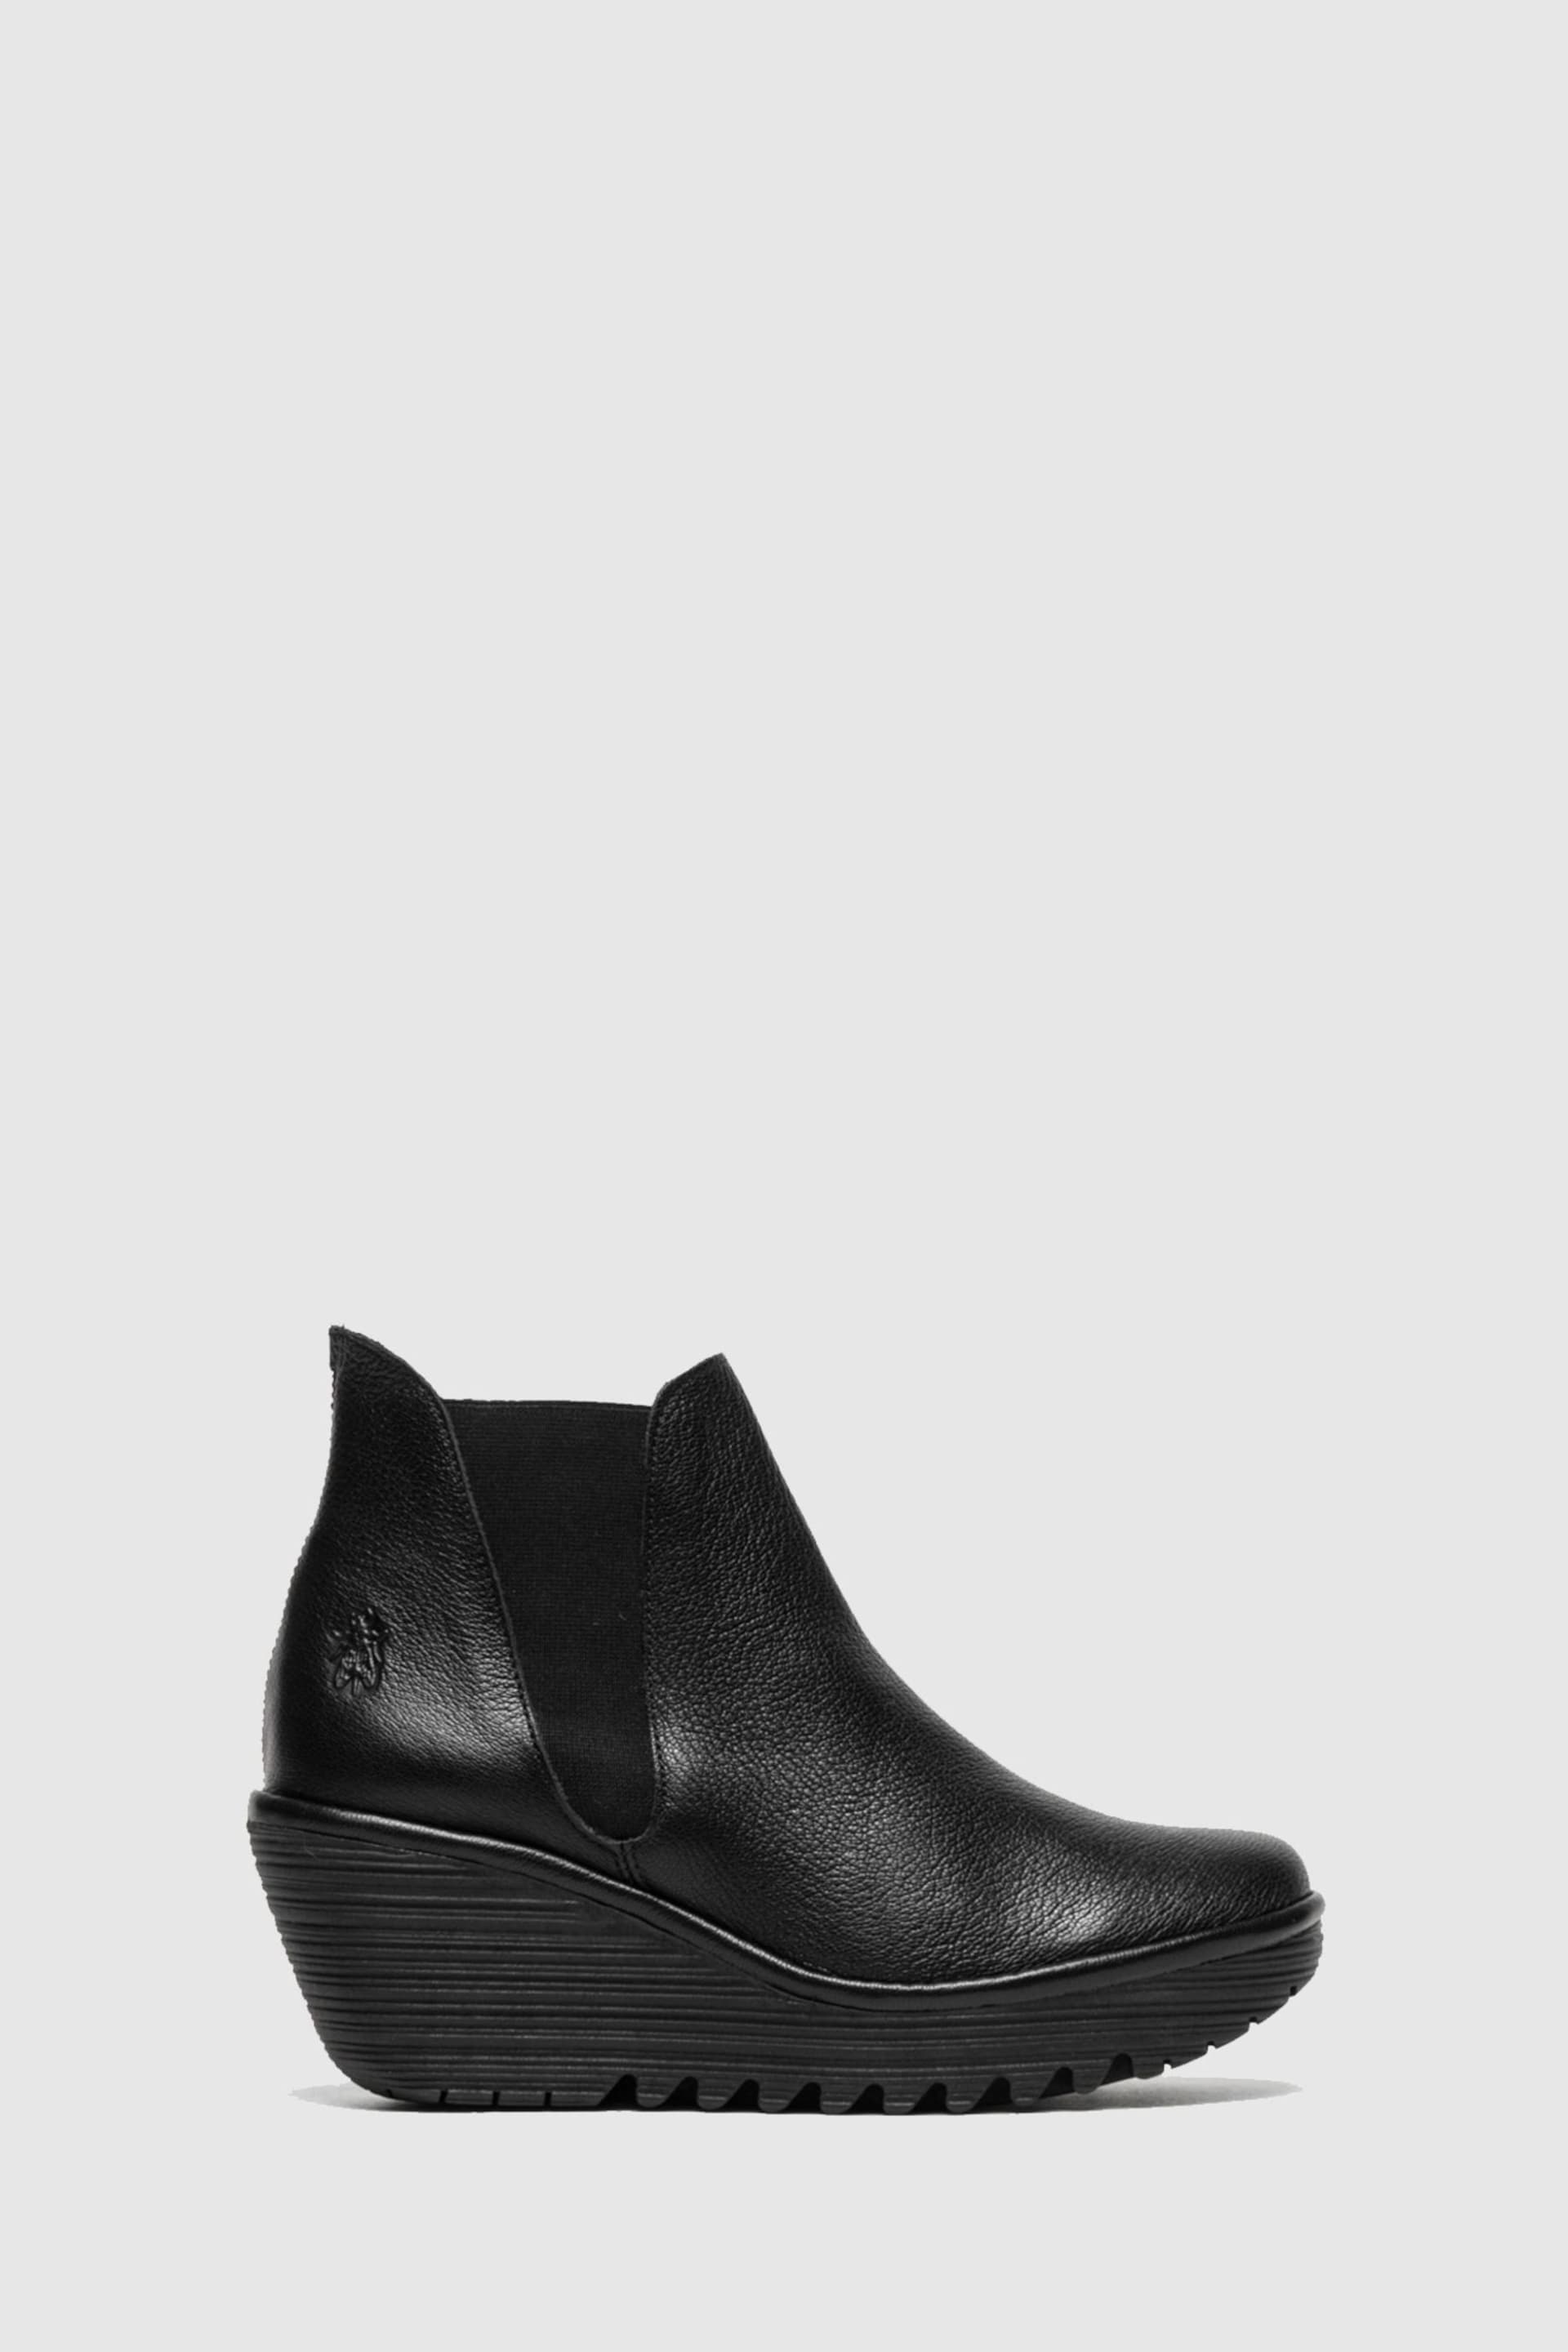 Fly London Wedge Ankle Boots - Image 1 of 5